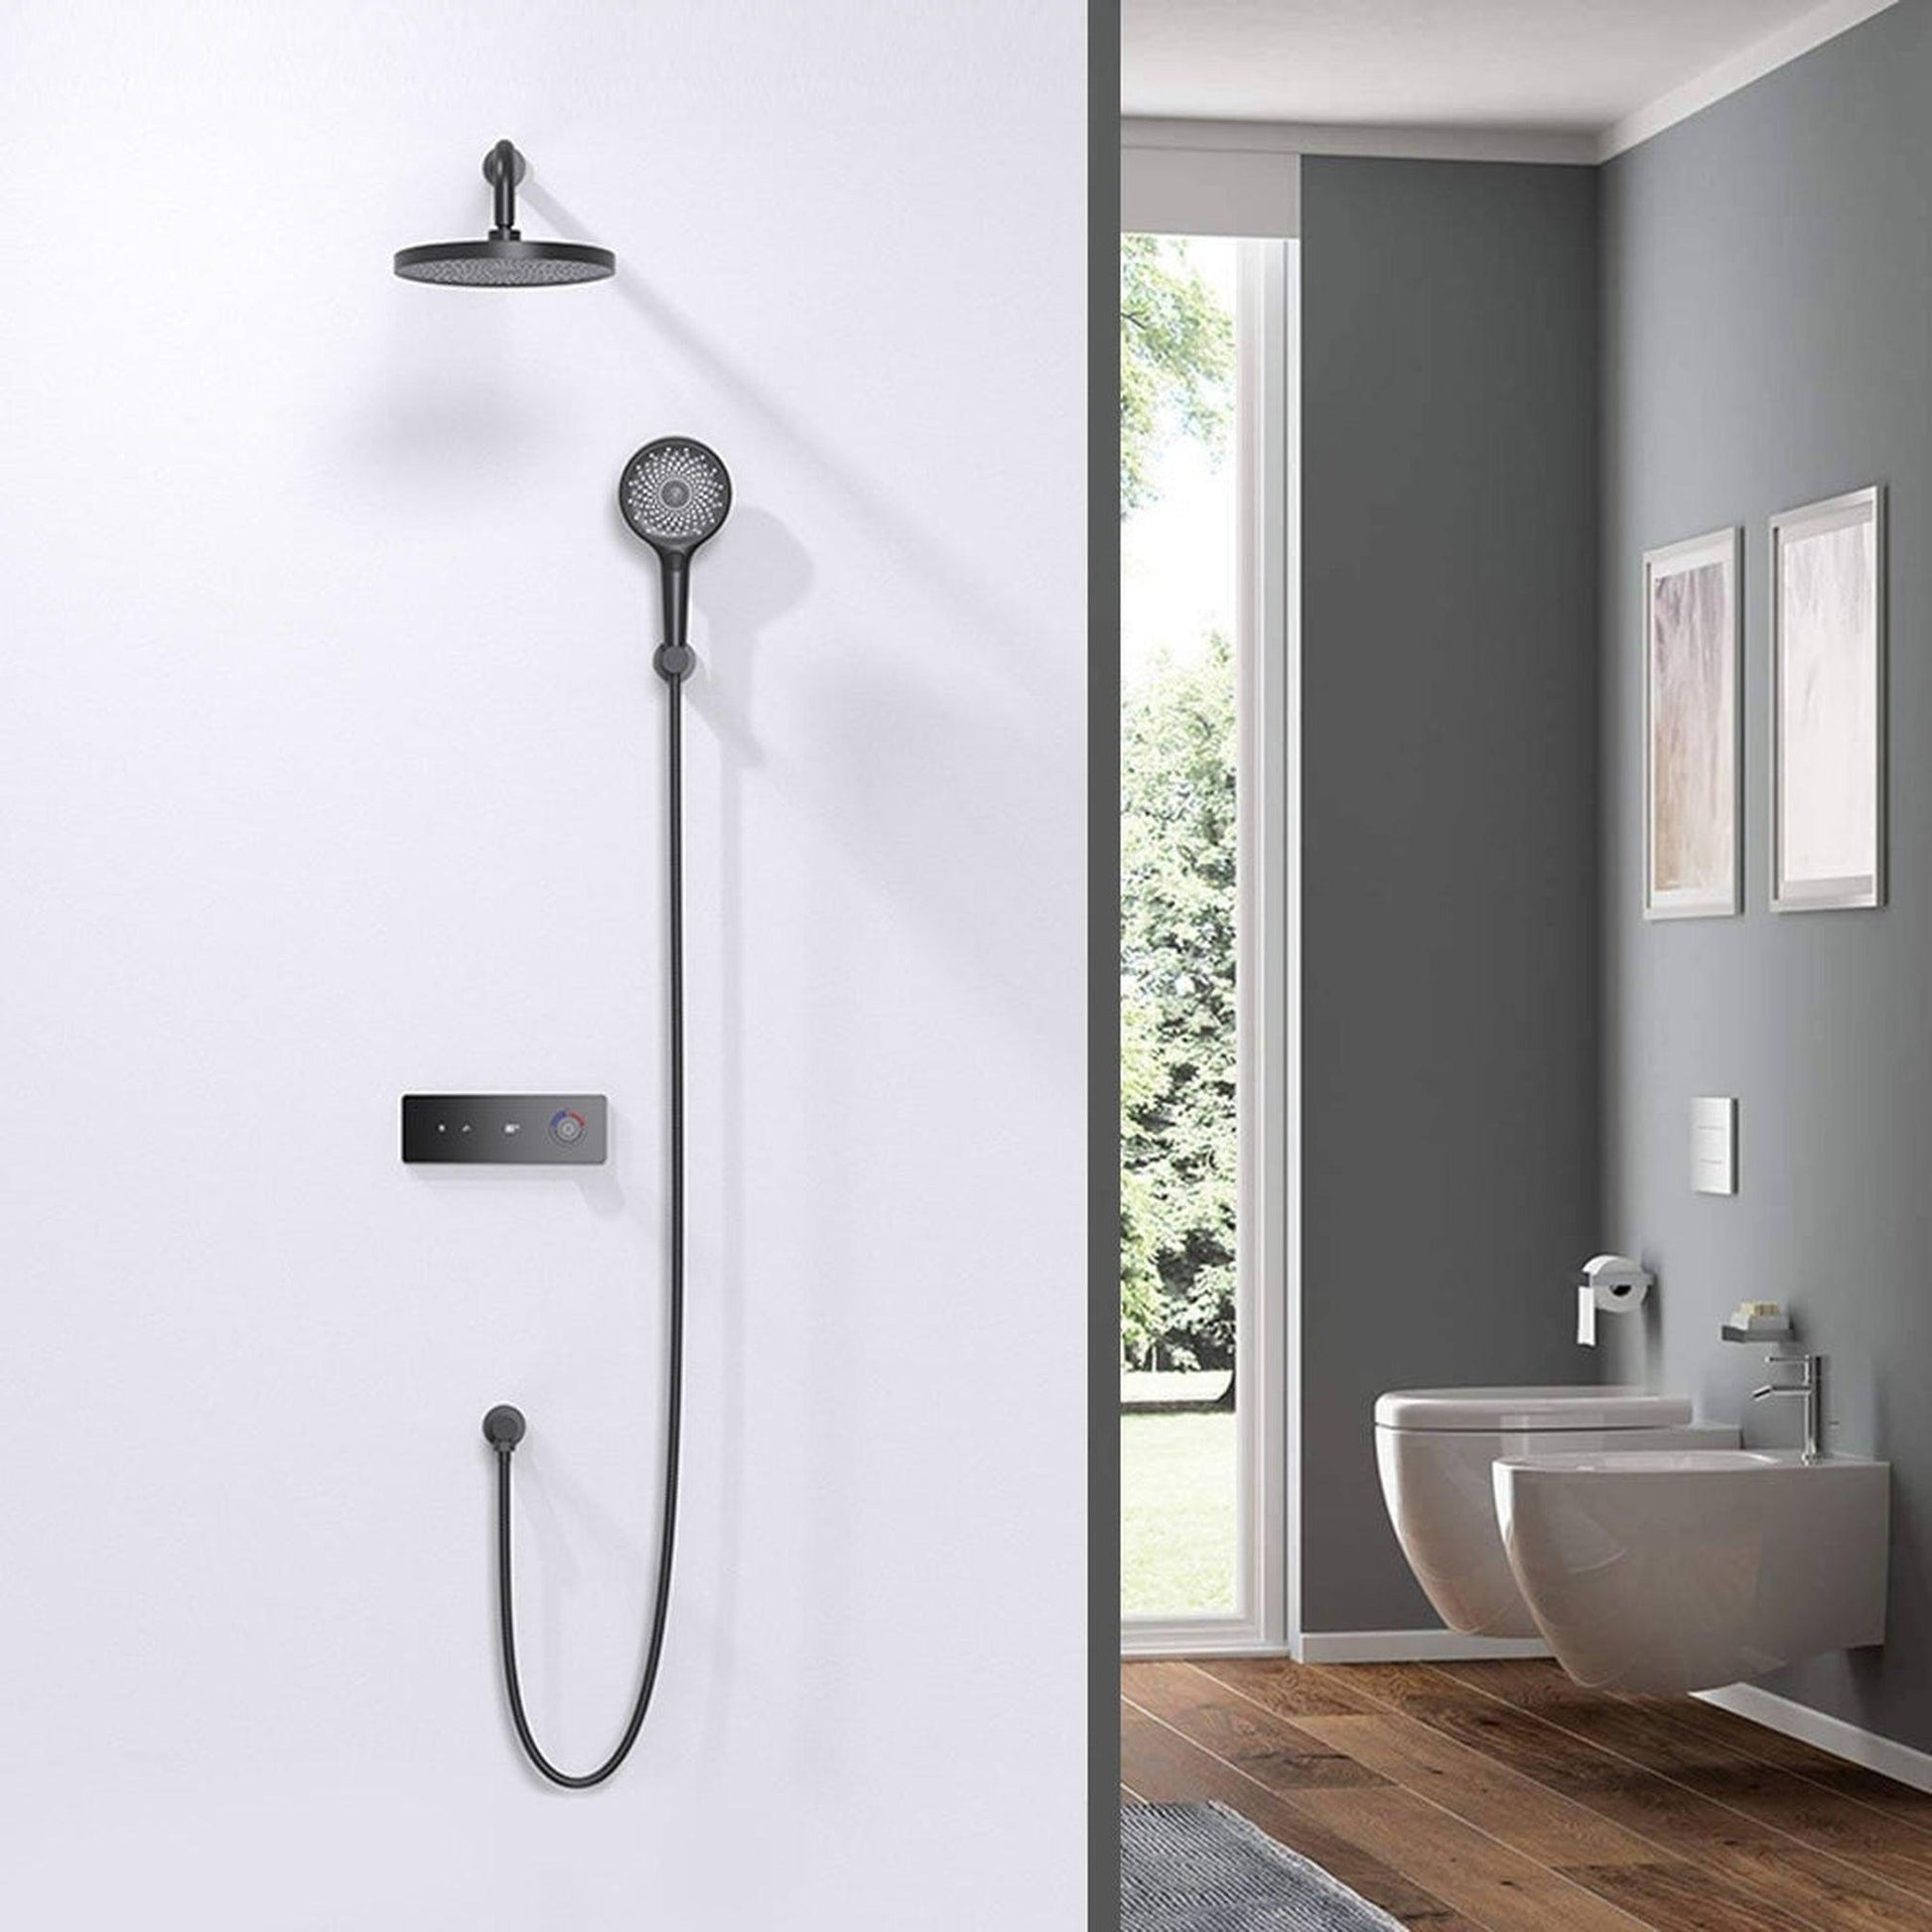 Fontana Novarra Creative Luxury Matte Black Round Wall-Mounted Rainfall Shower System With Hand Shower and Digital Shower Mixer